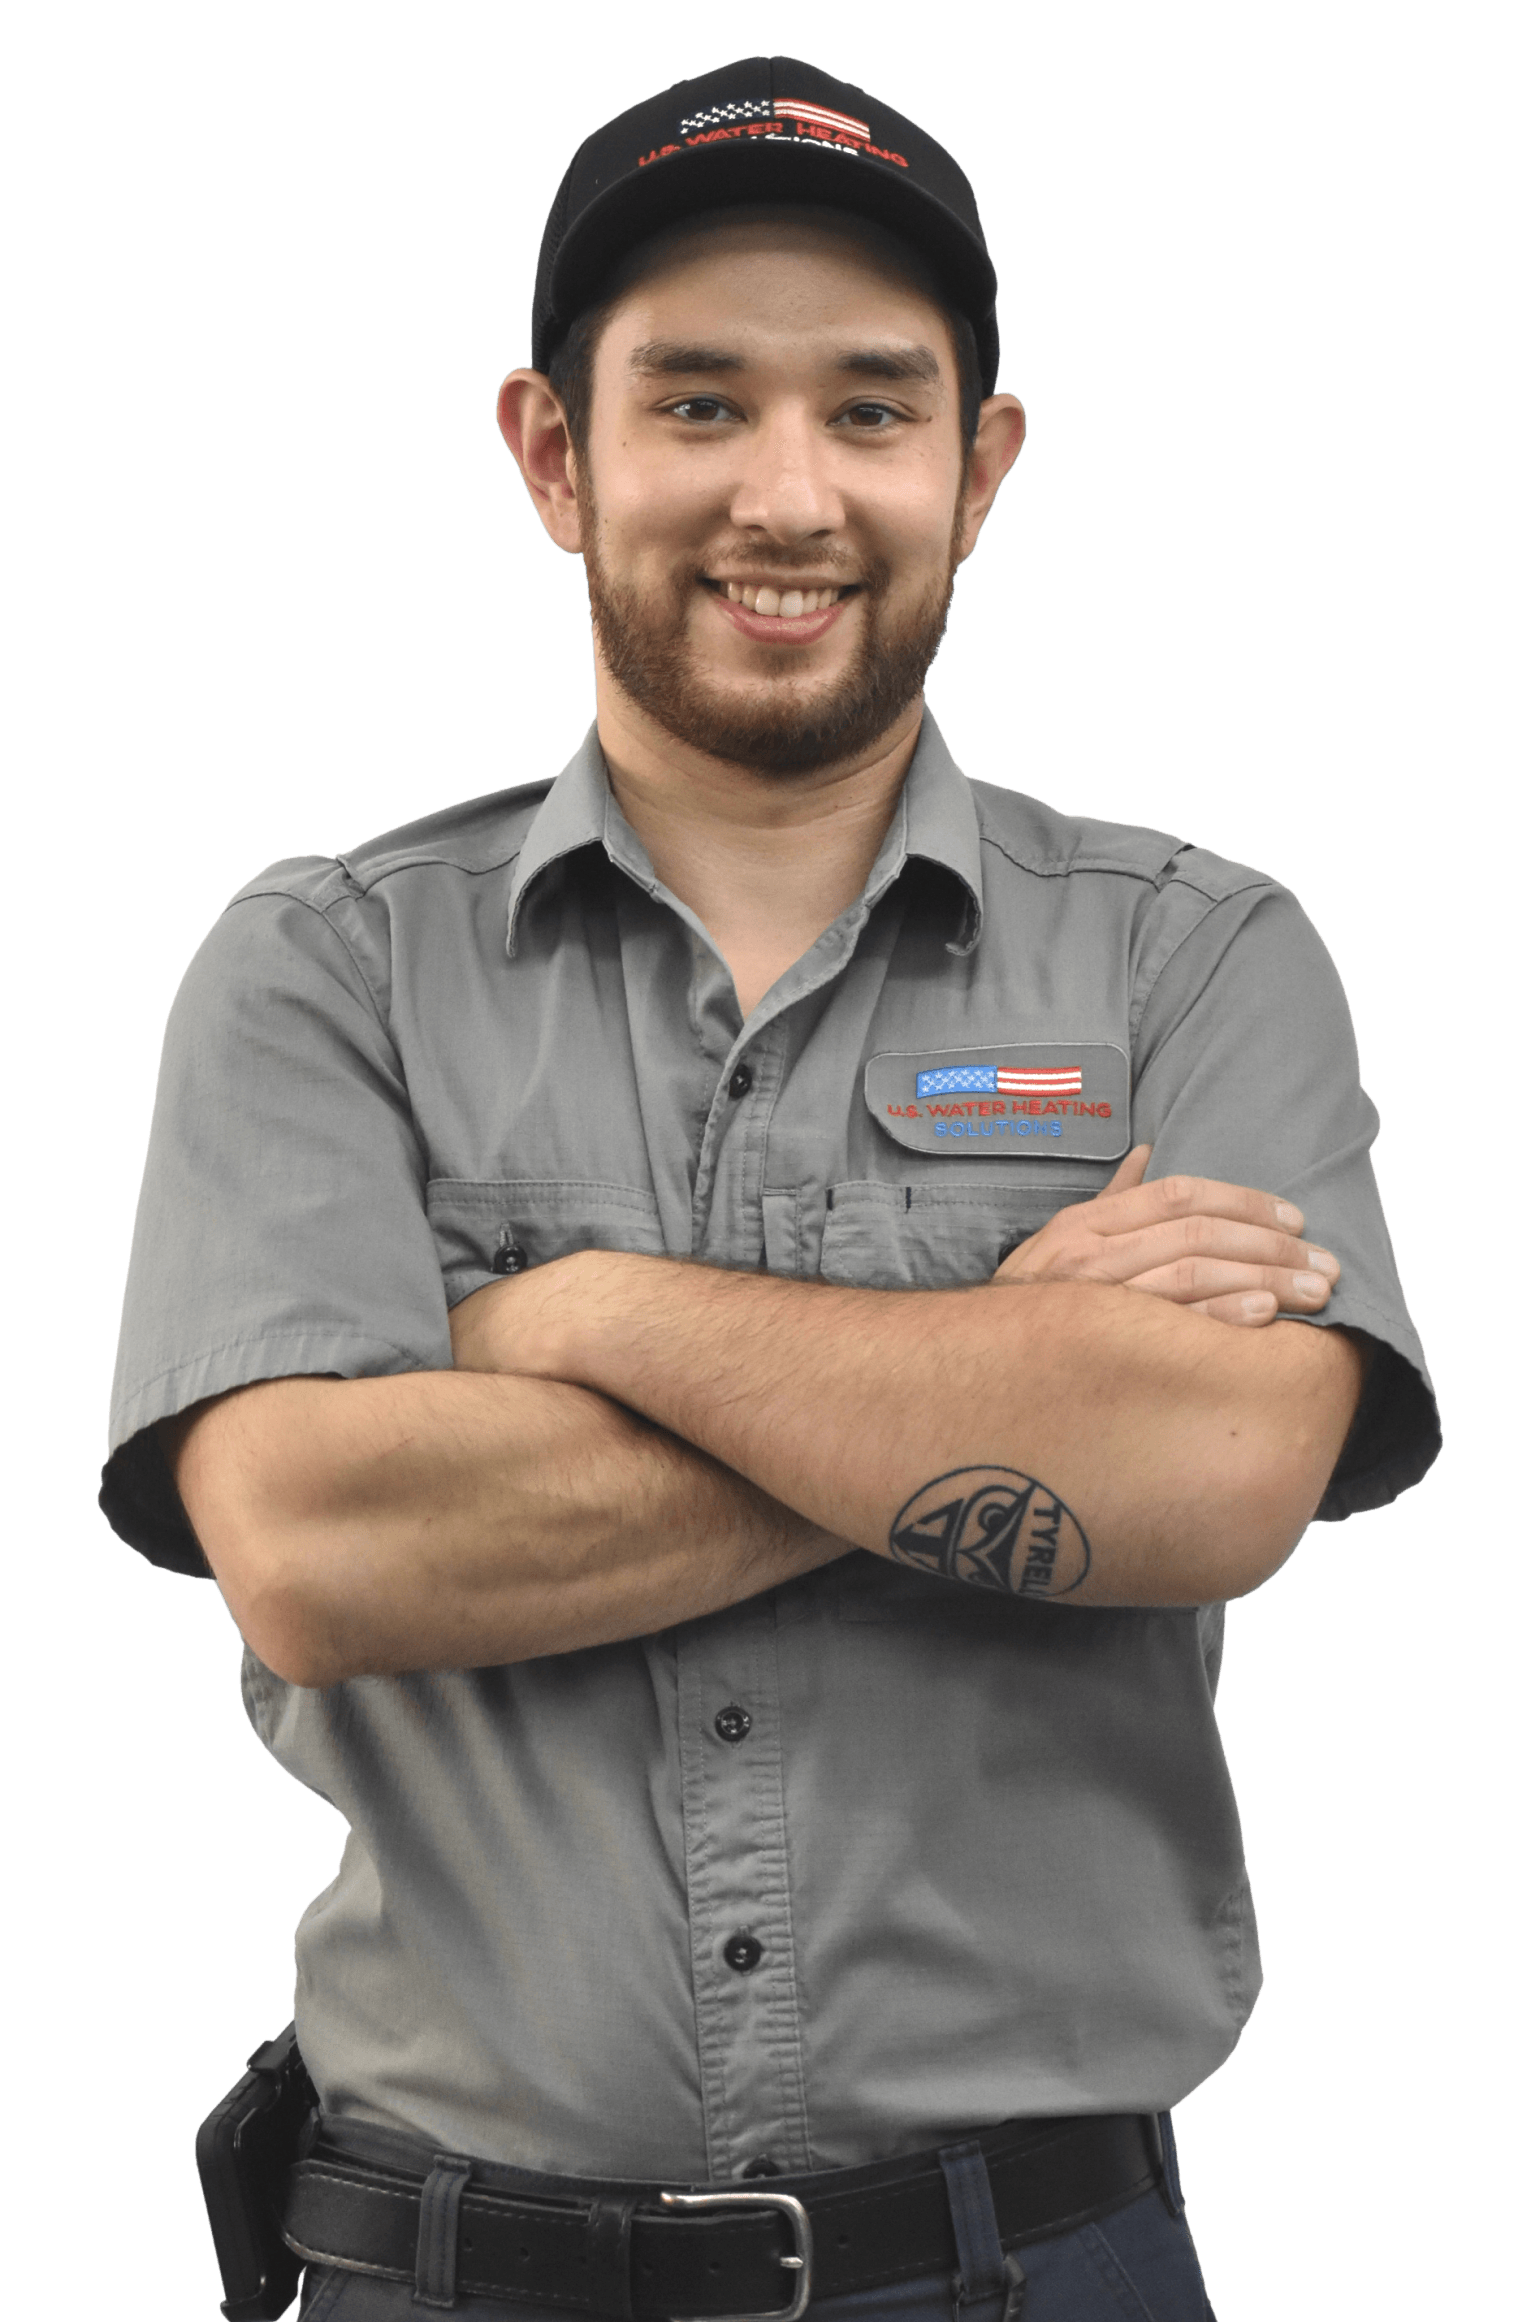 Illinois water heater repair technician, Seil, with arms crossed